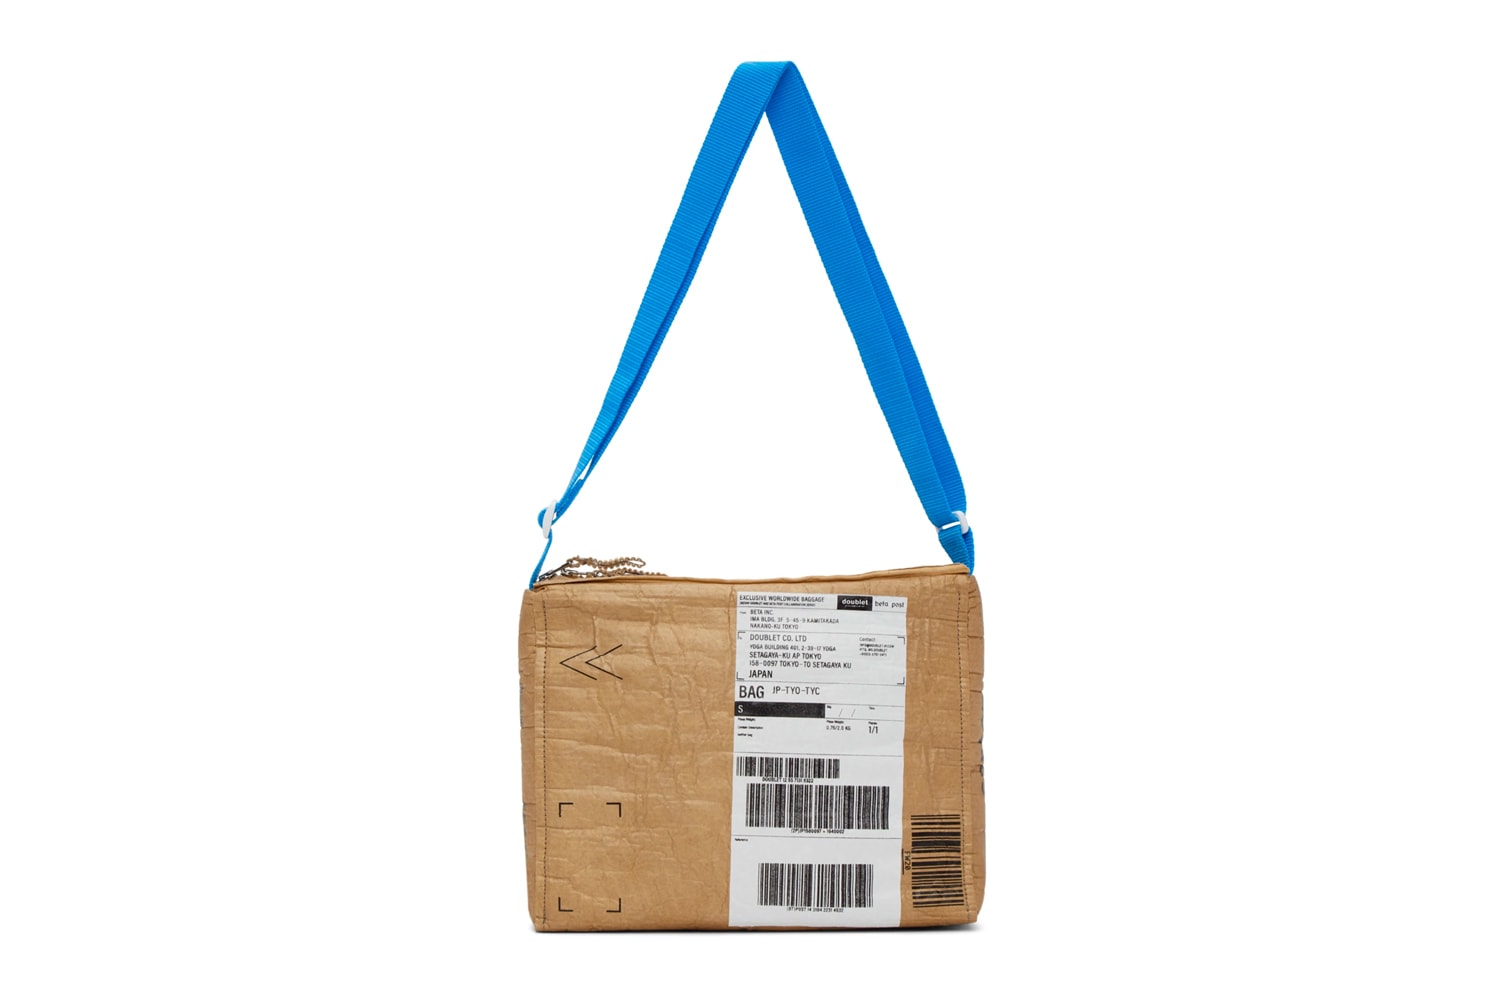 doublet Carton Pouch Bag Release Info Cardboard Box Buy Price